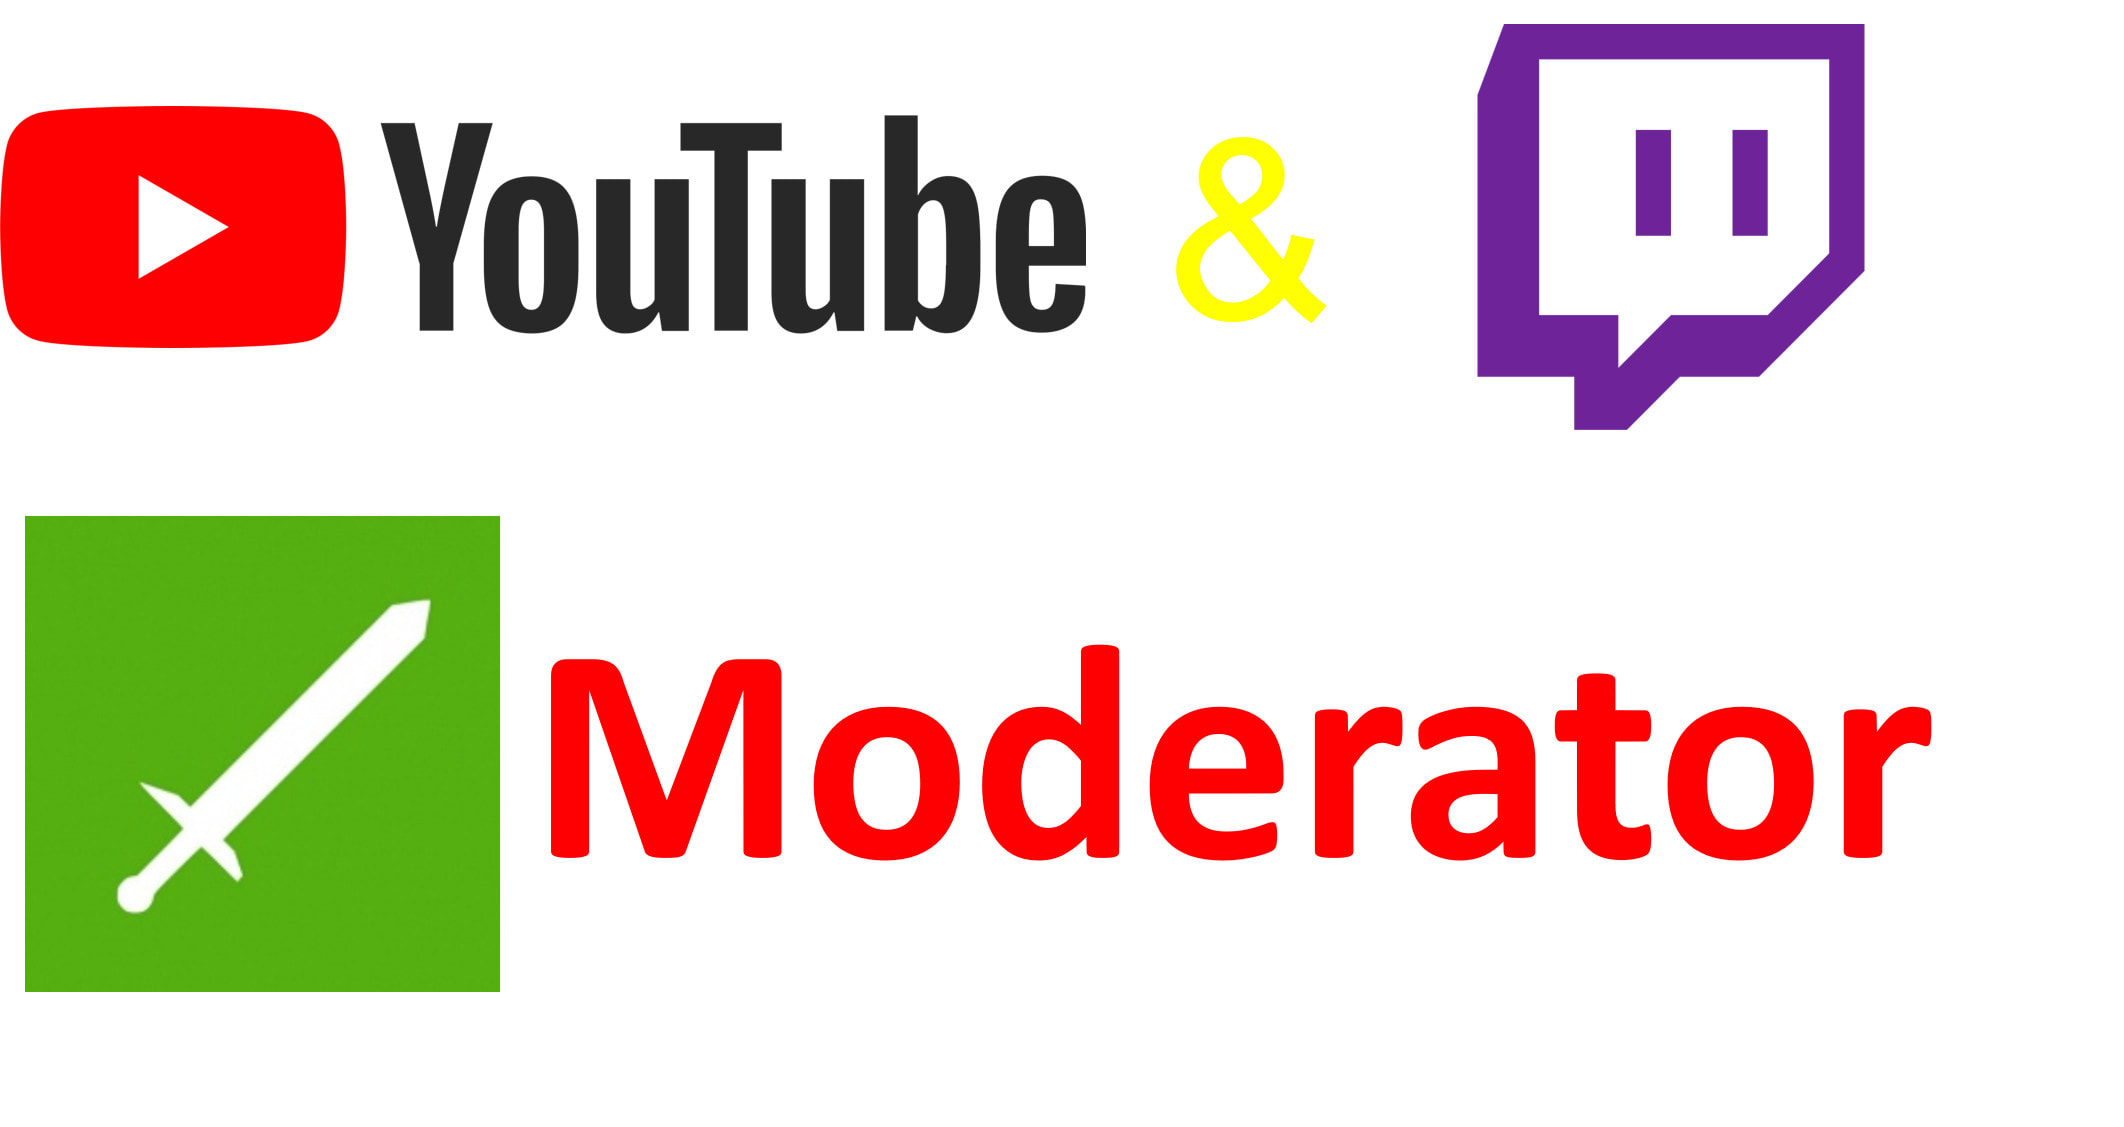 Do The Moderator For Your Live On Youtube And Twitch By Lorenzovedana Fiverr